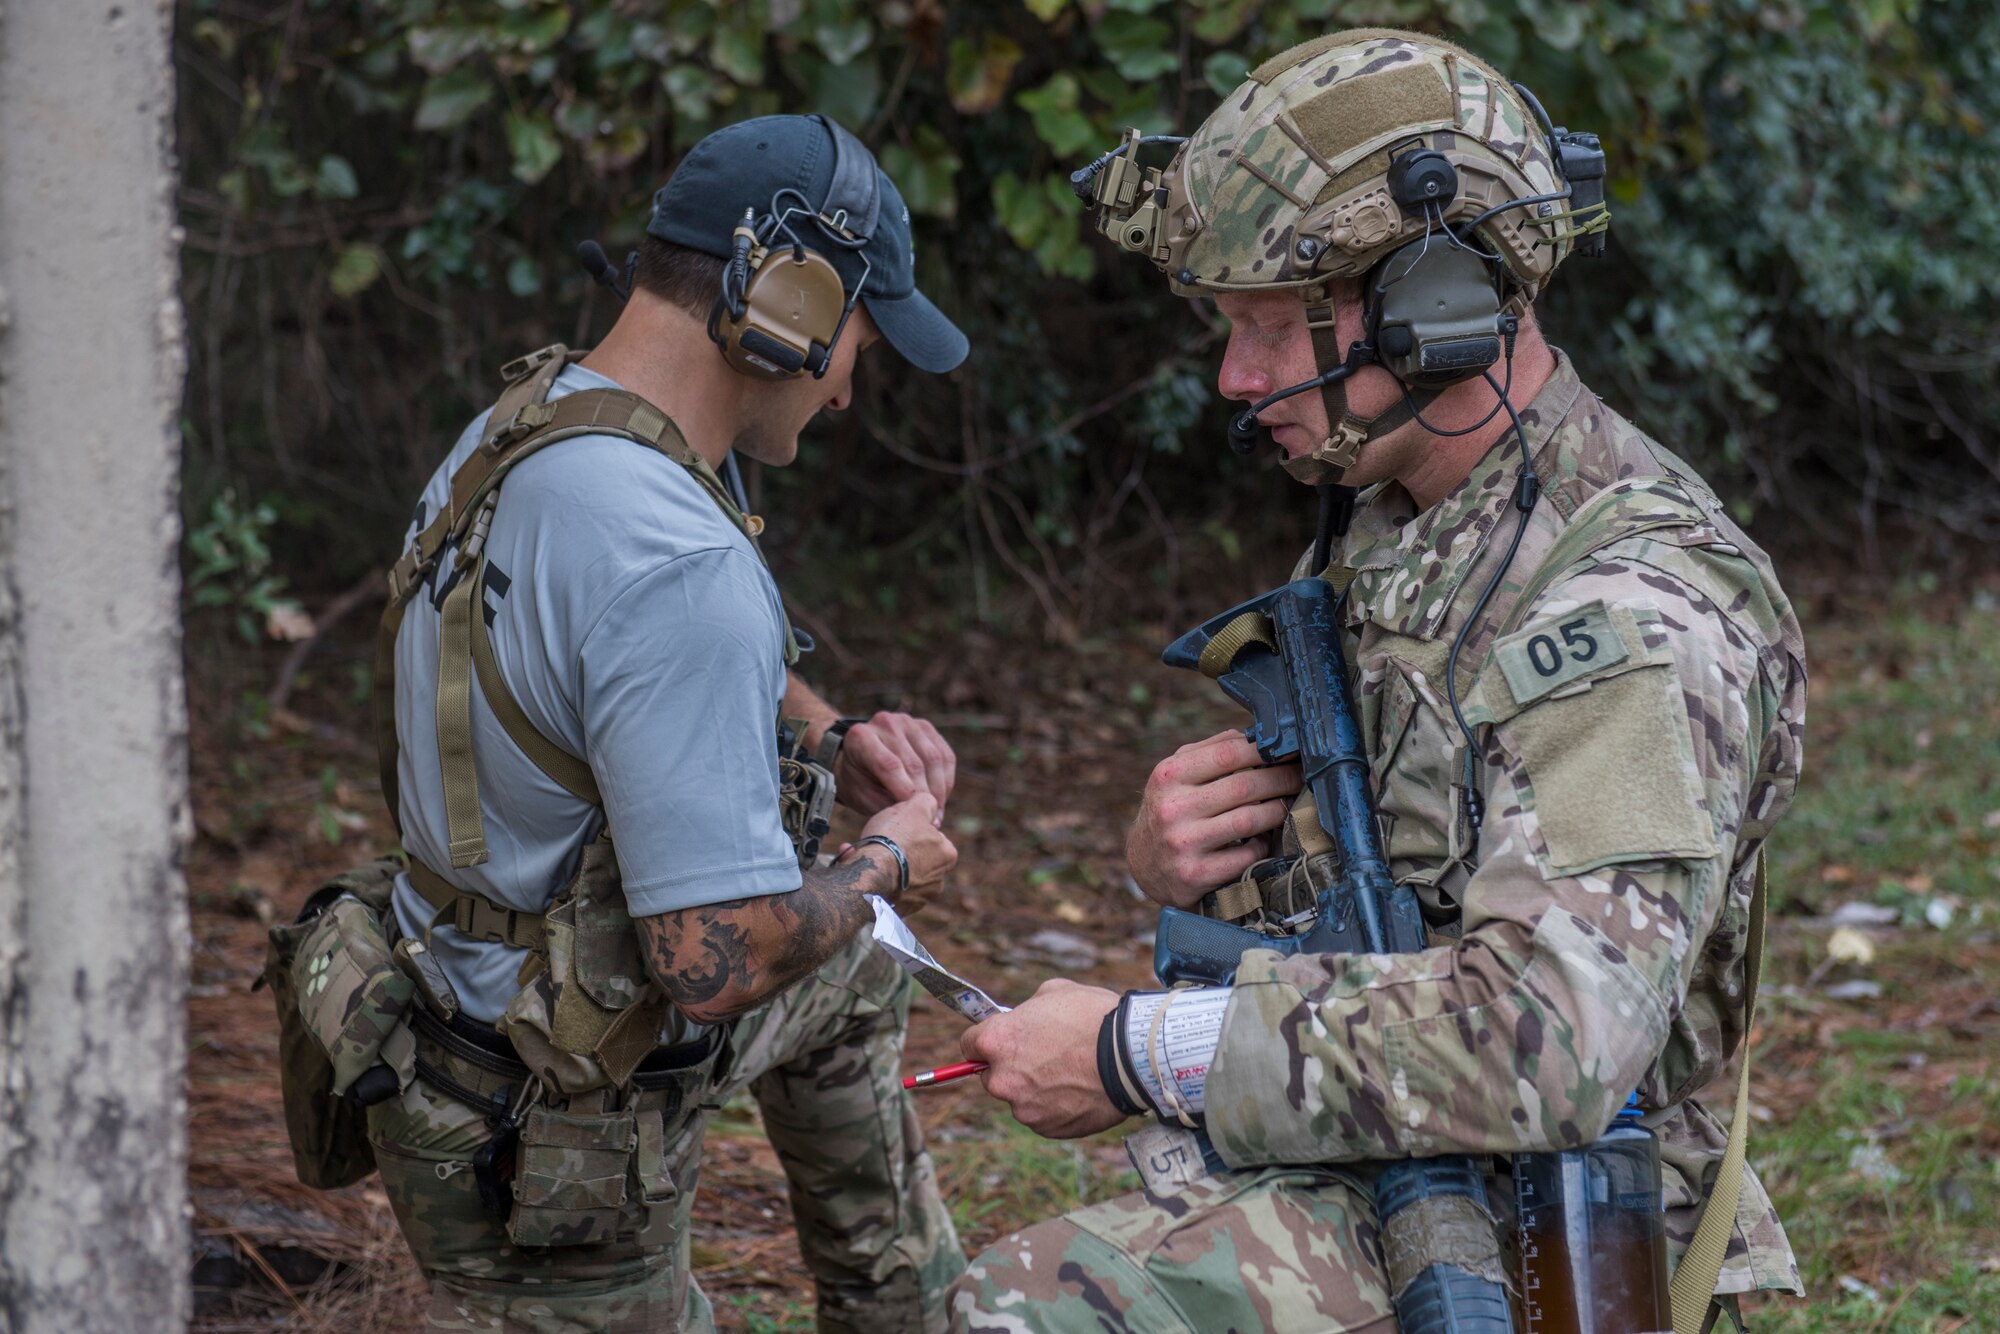 A pair of tactical air control party candidates participate in a call for fire scenario by facing each other and talking into headsets connected to radios on their vests.